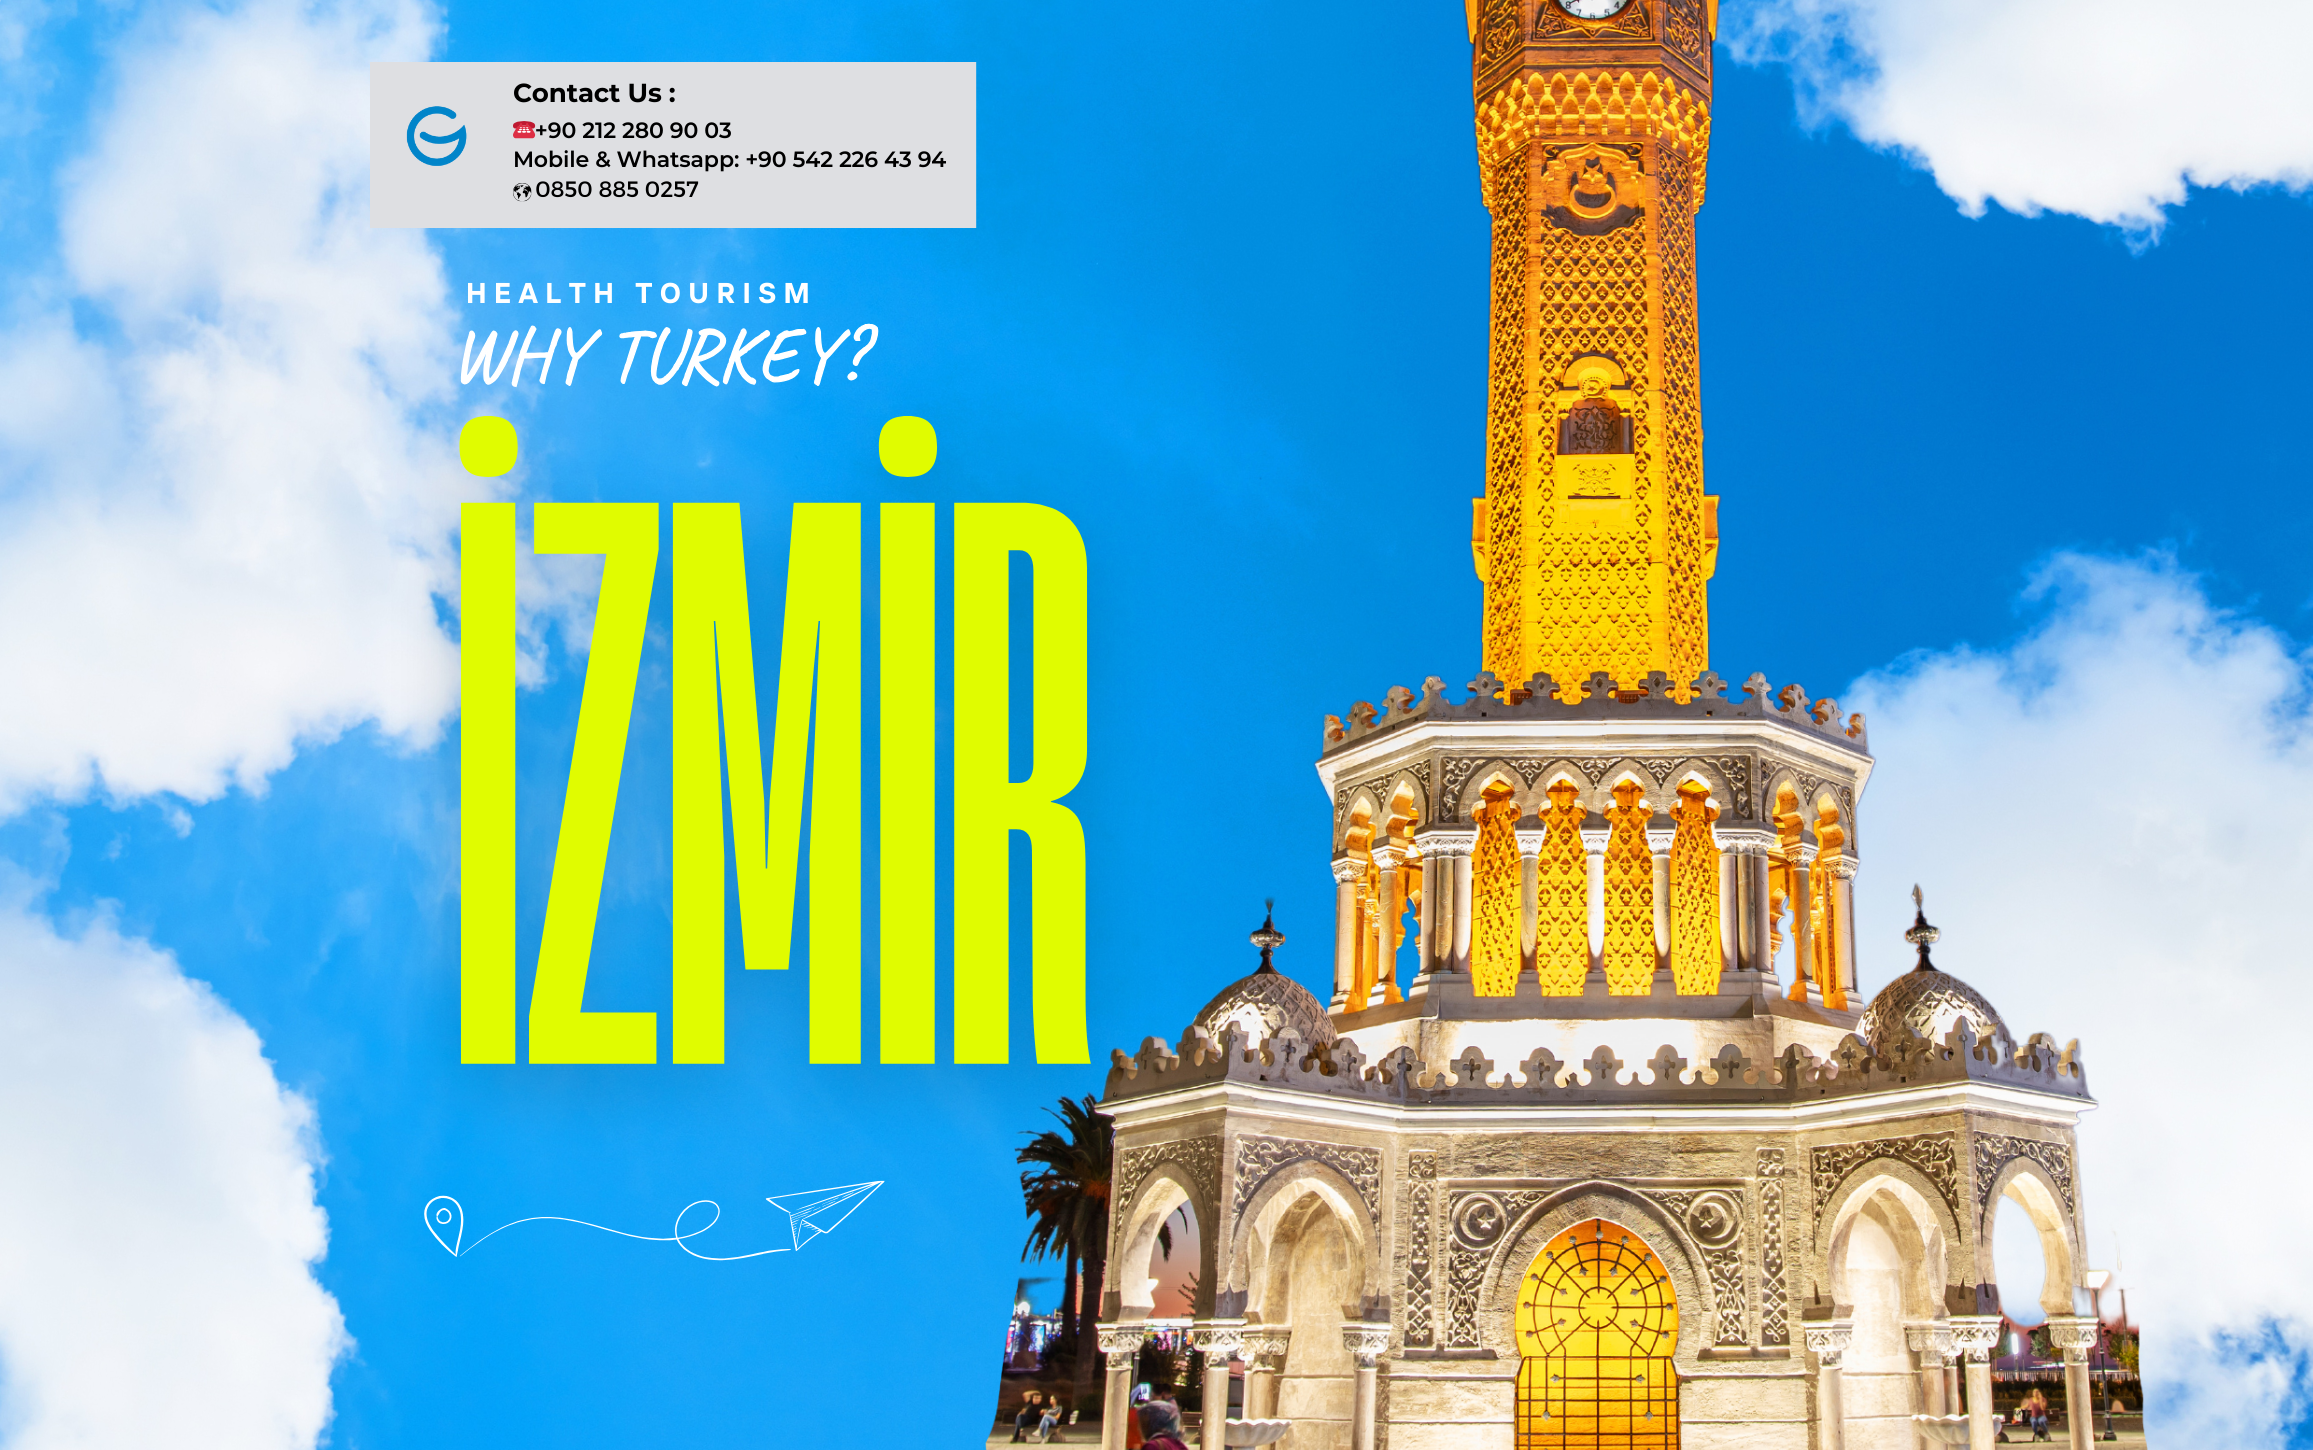 Why Health Tourism in Izmir?